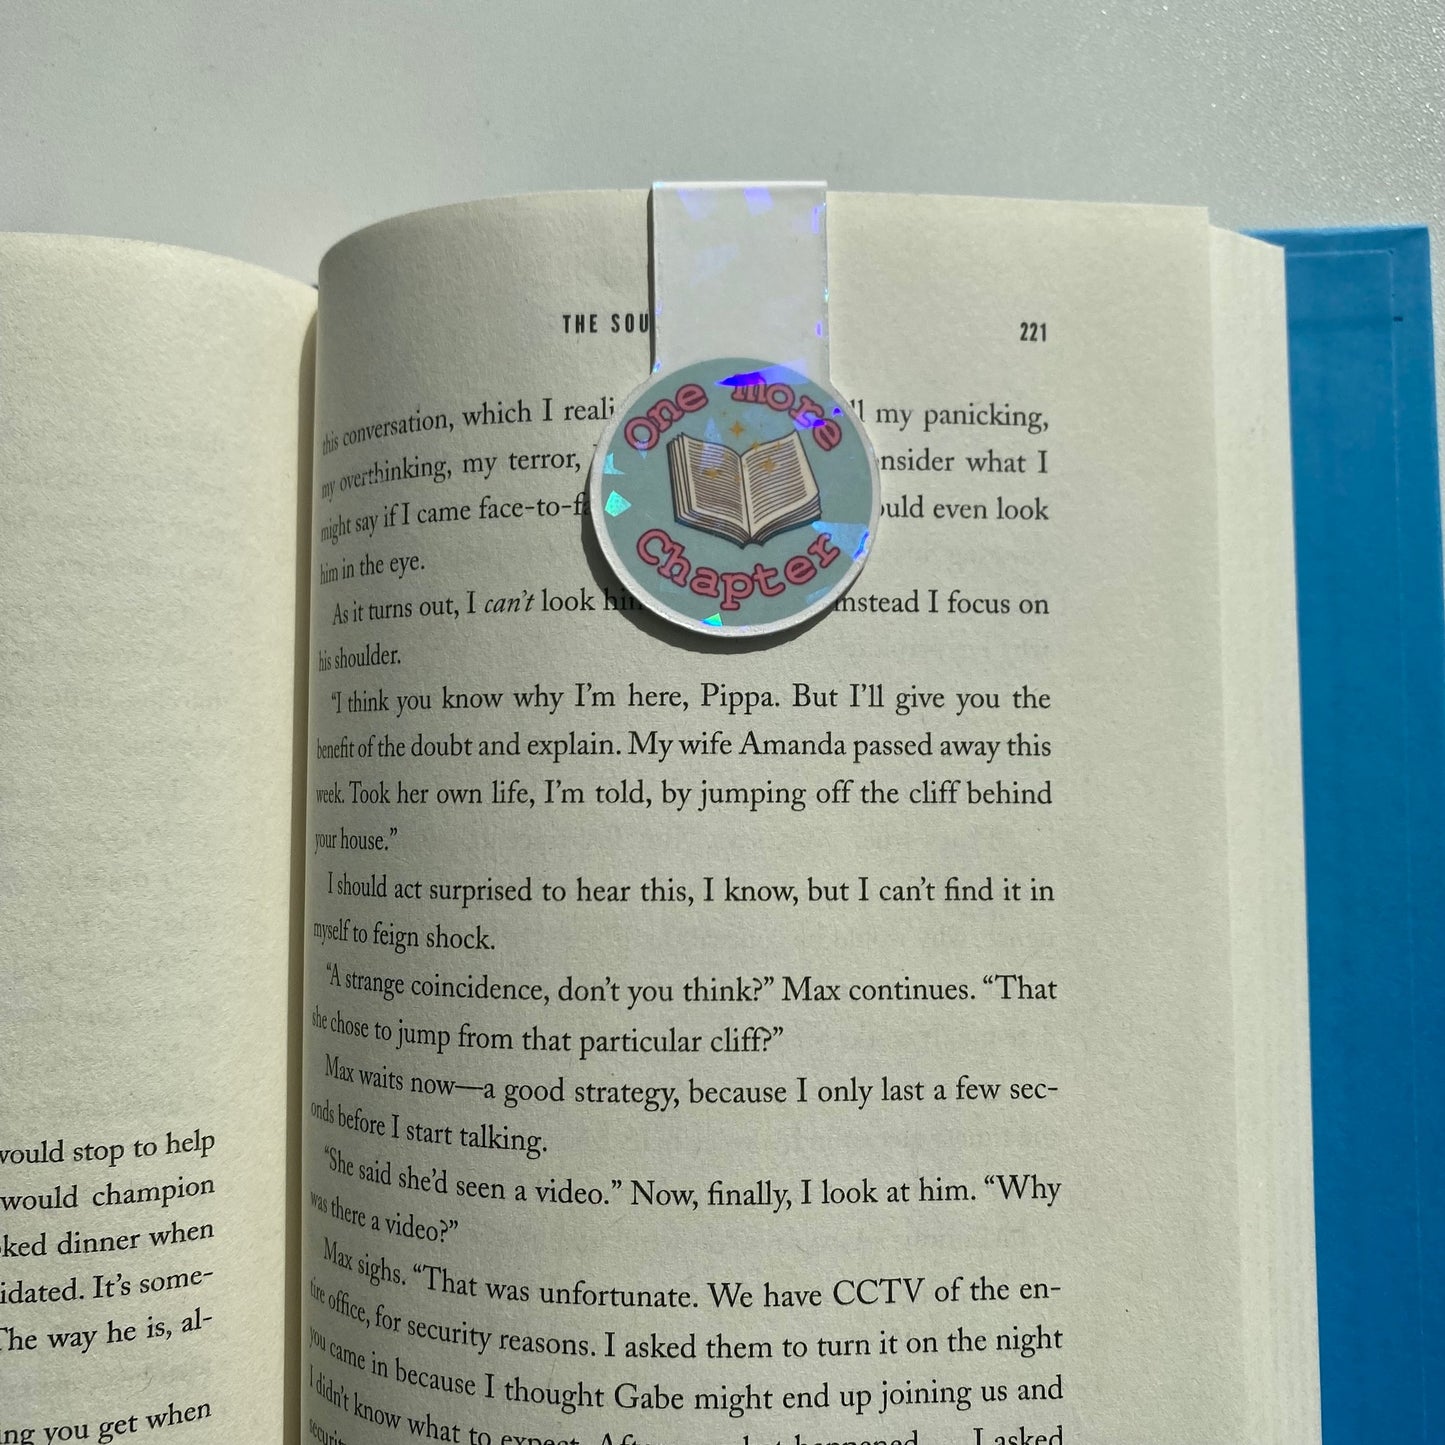 Holographic Magnetic Bookmark